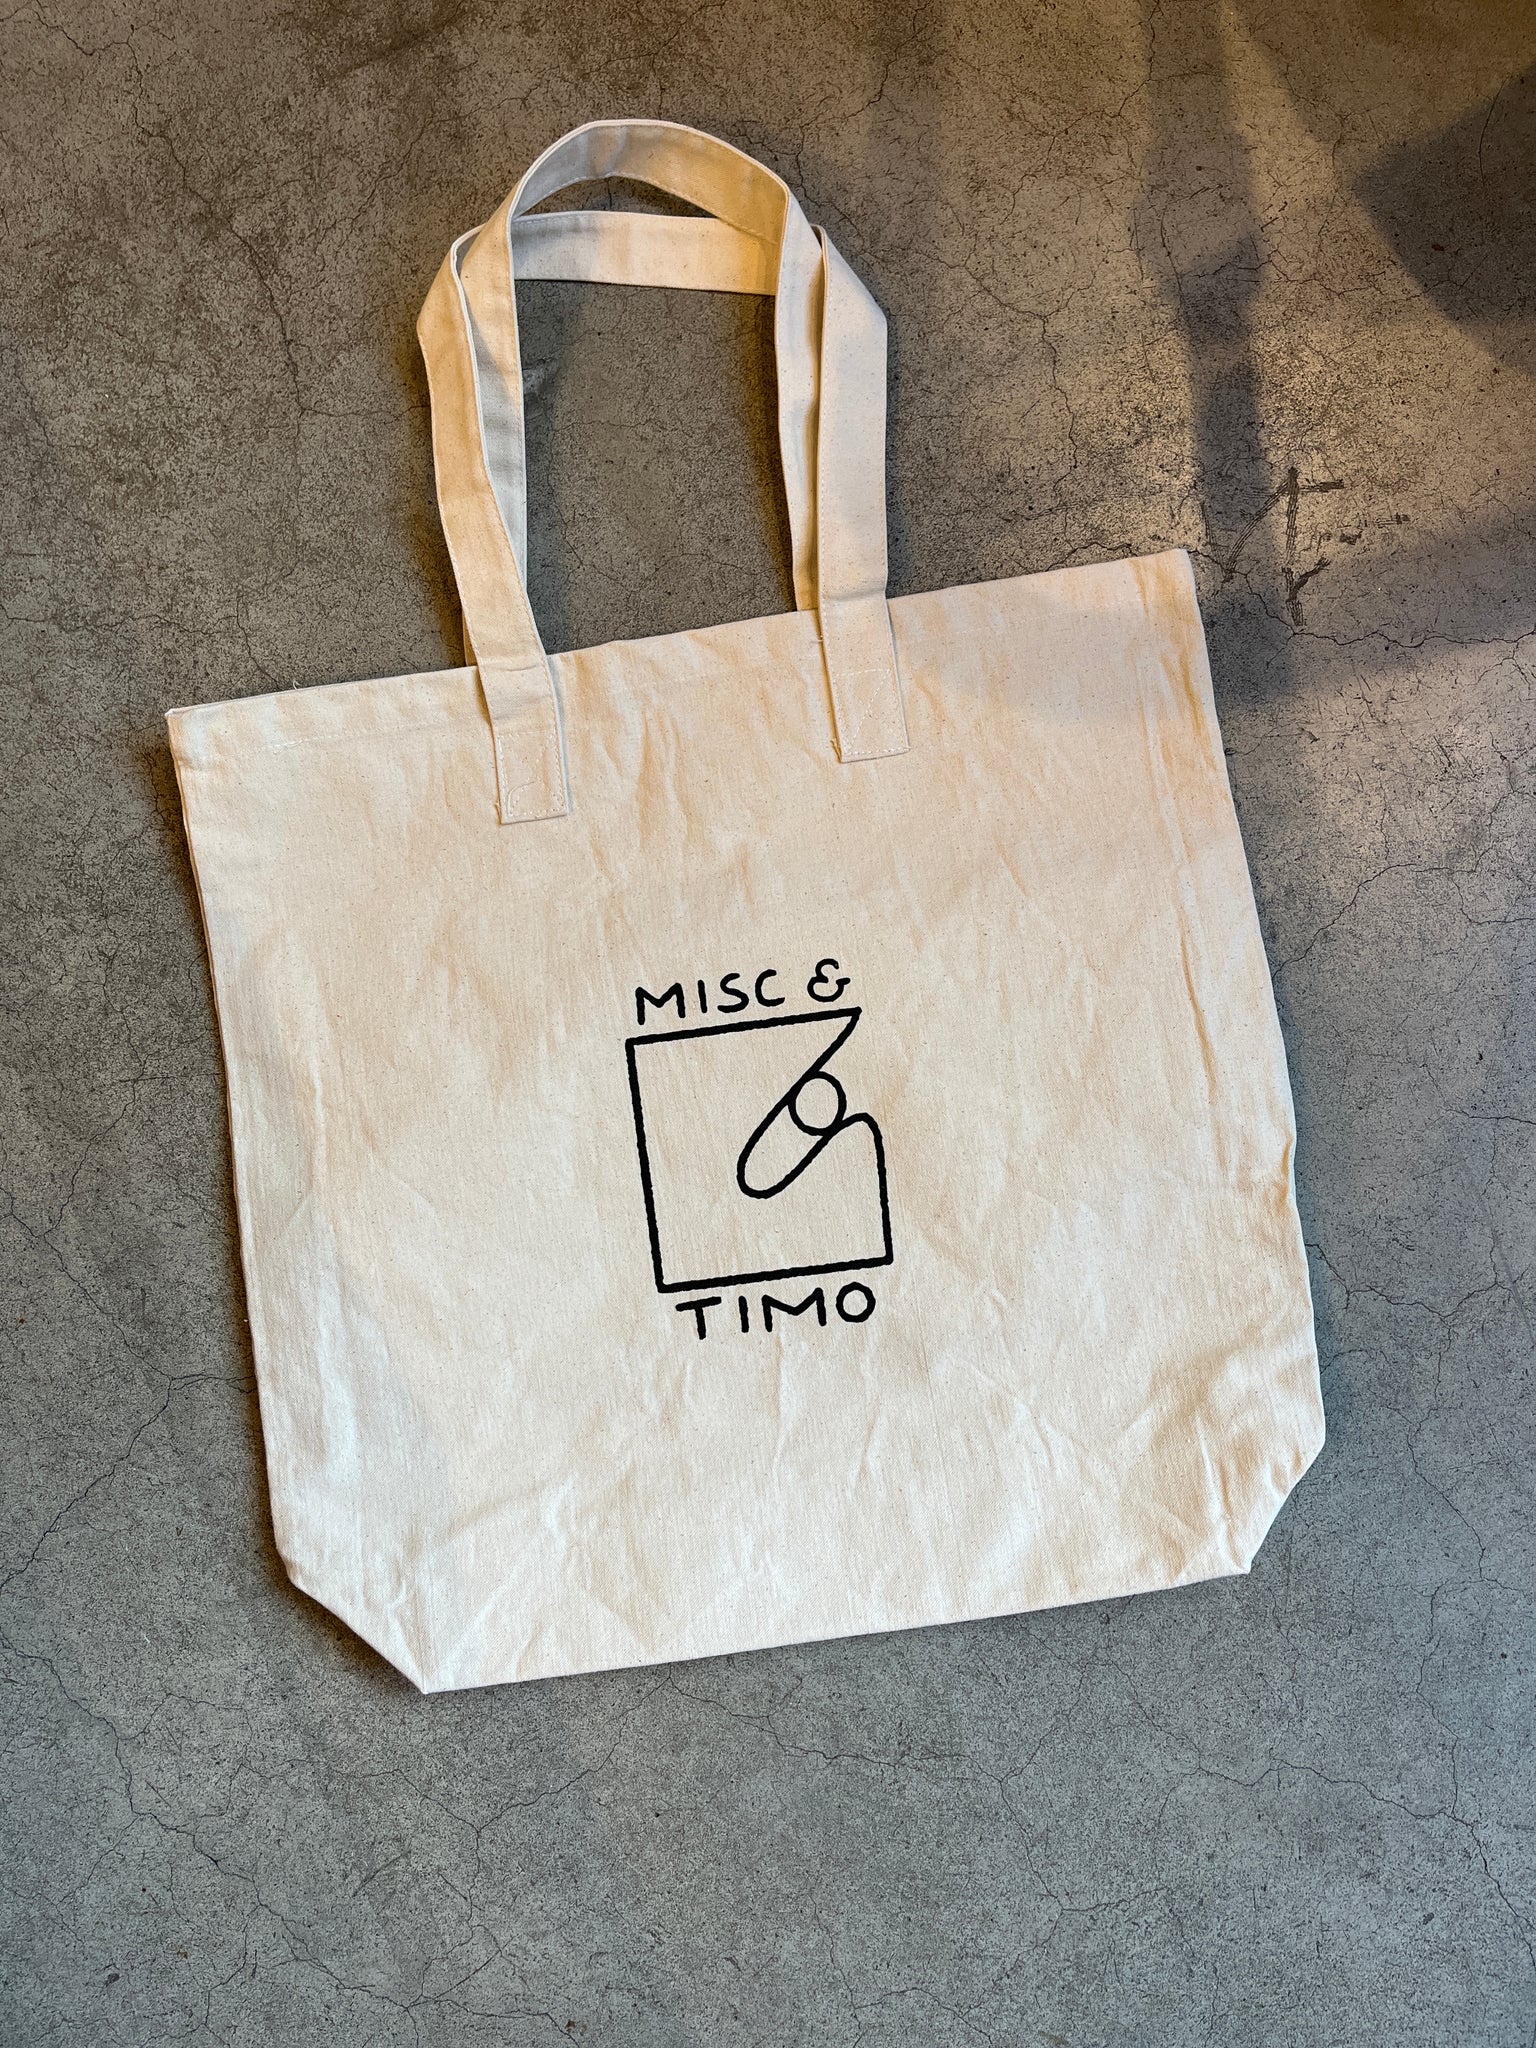 Misc x Timo Tote Bag